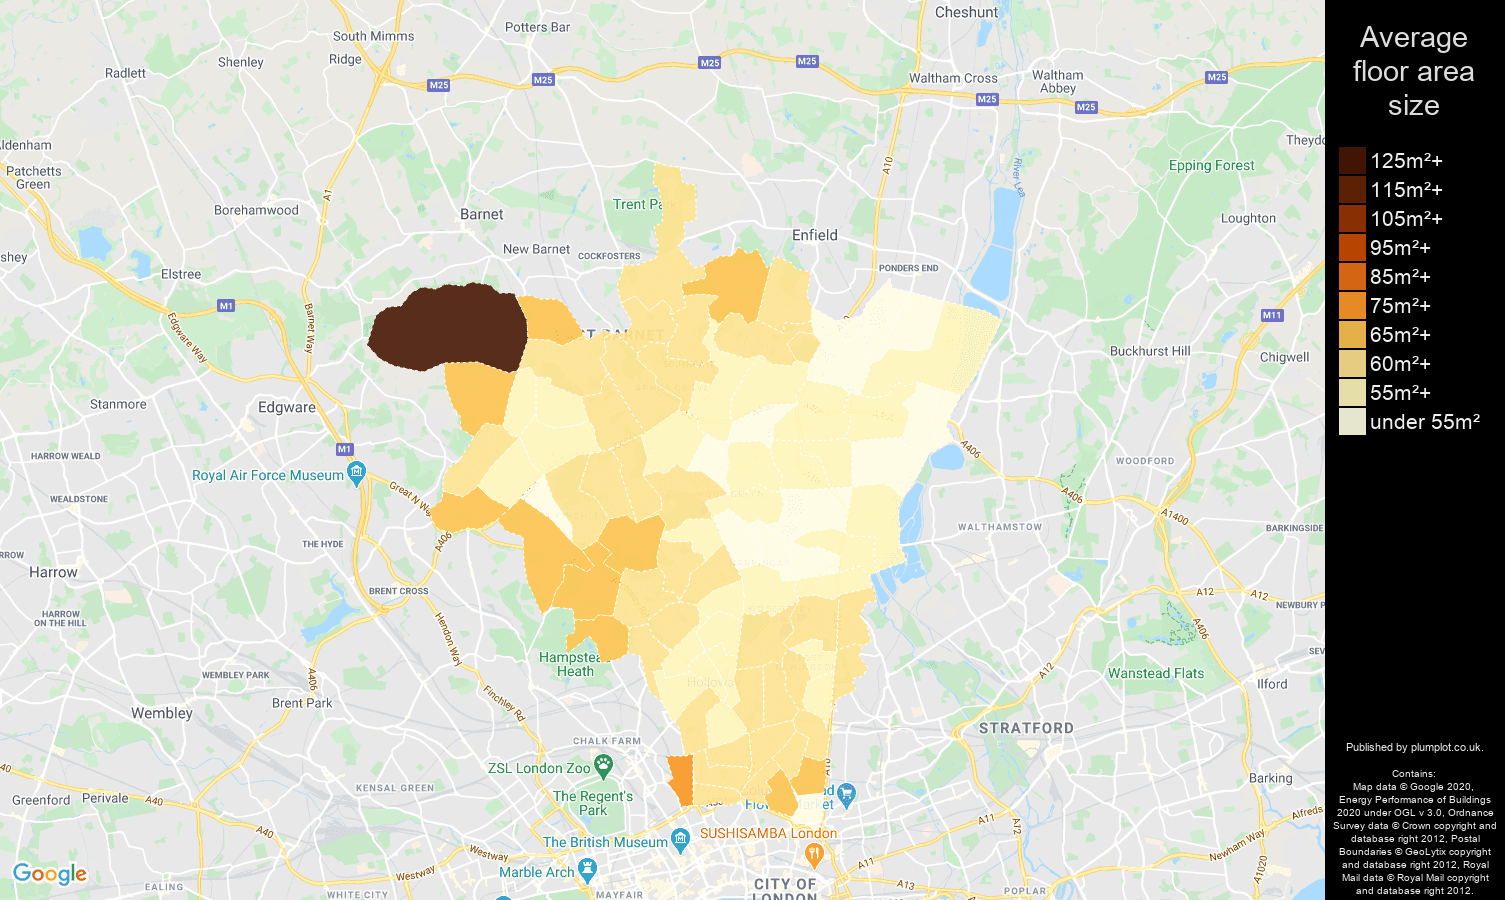 North London map of average floor area size of flats